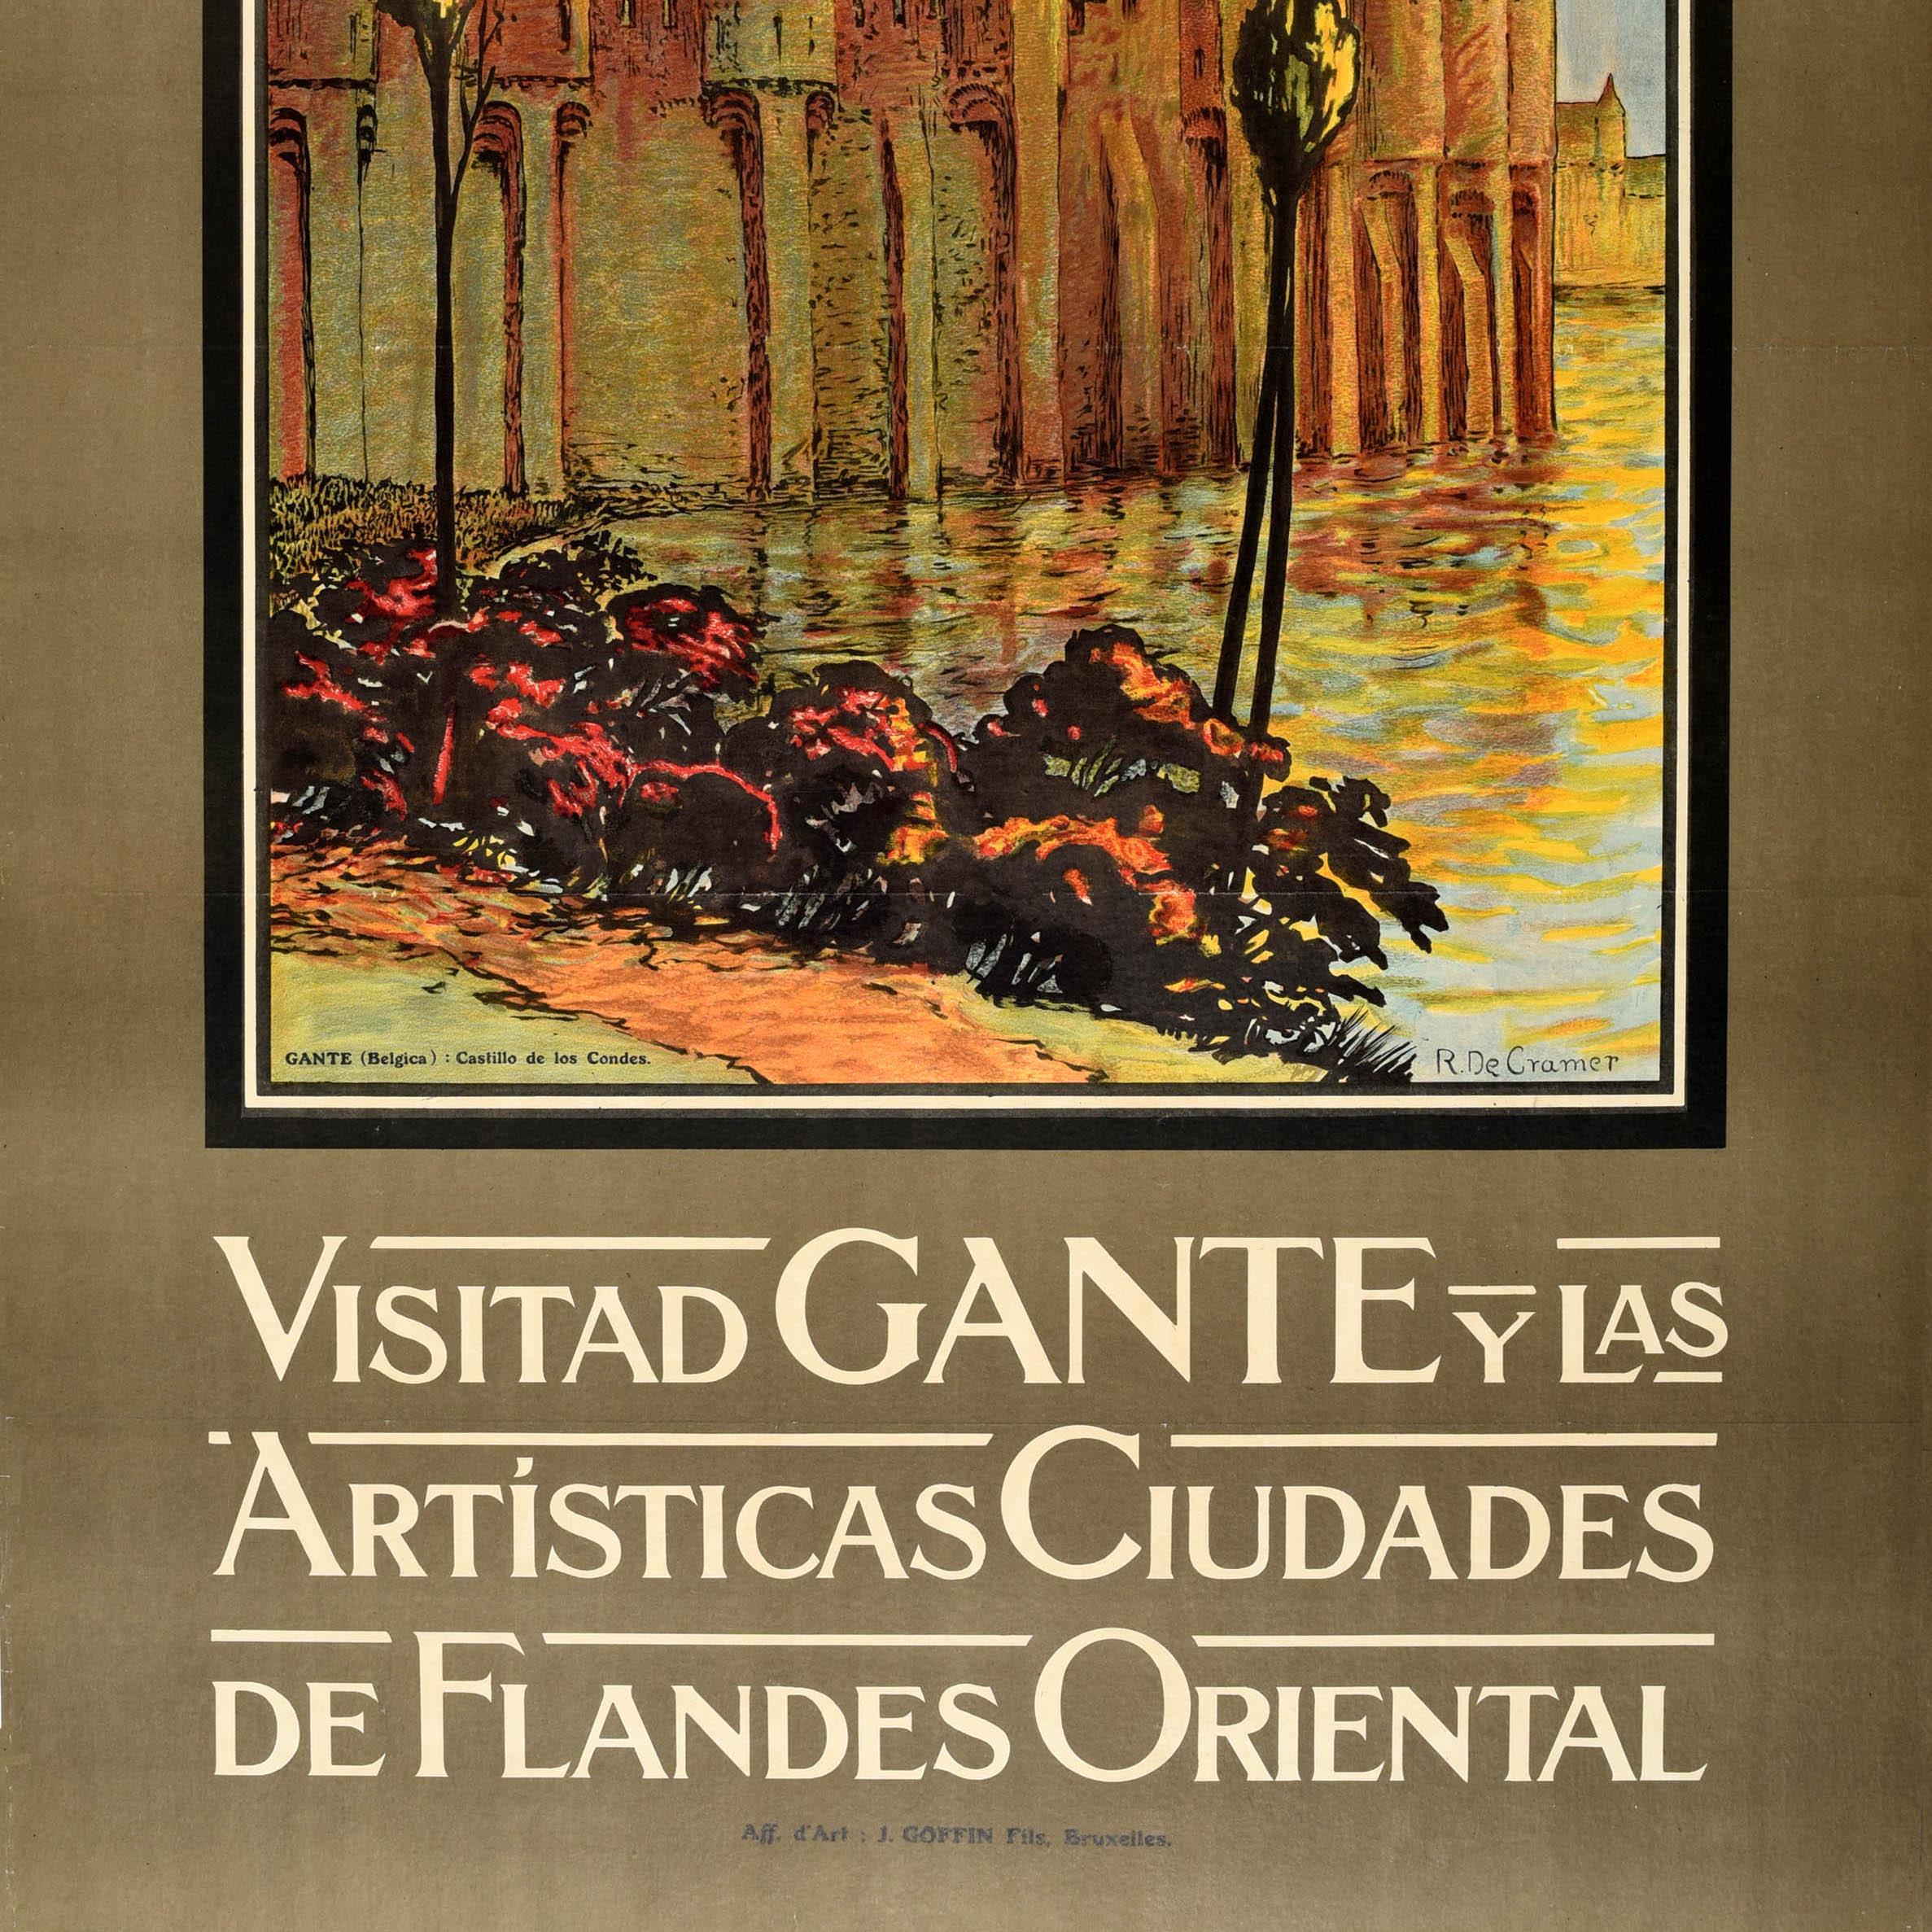 Original antique railway travel poster - Visitad Gante Y Las Artisticas Ciudades De Flandes Oriental / Visit Ghent And The Artistic Cities Of East Flanders - featuring scenic artwork by the Belgian painter and engraver Rene De Cramer (1876-1951) of